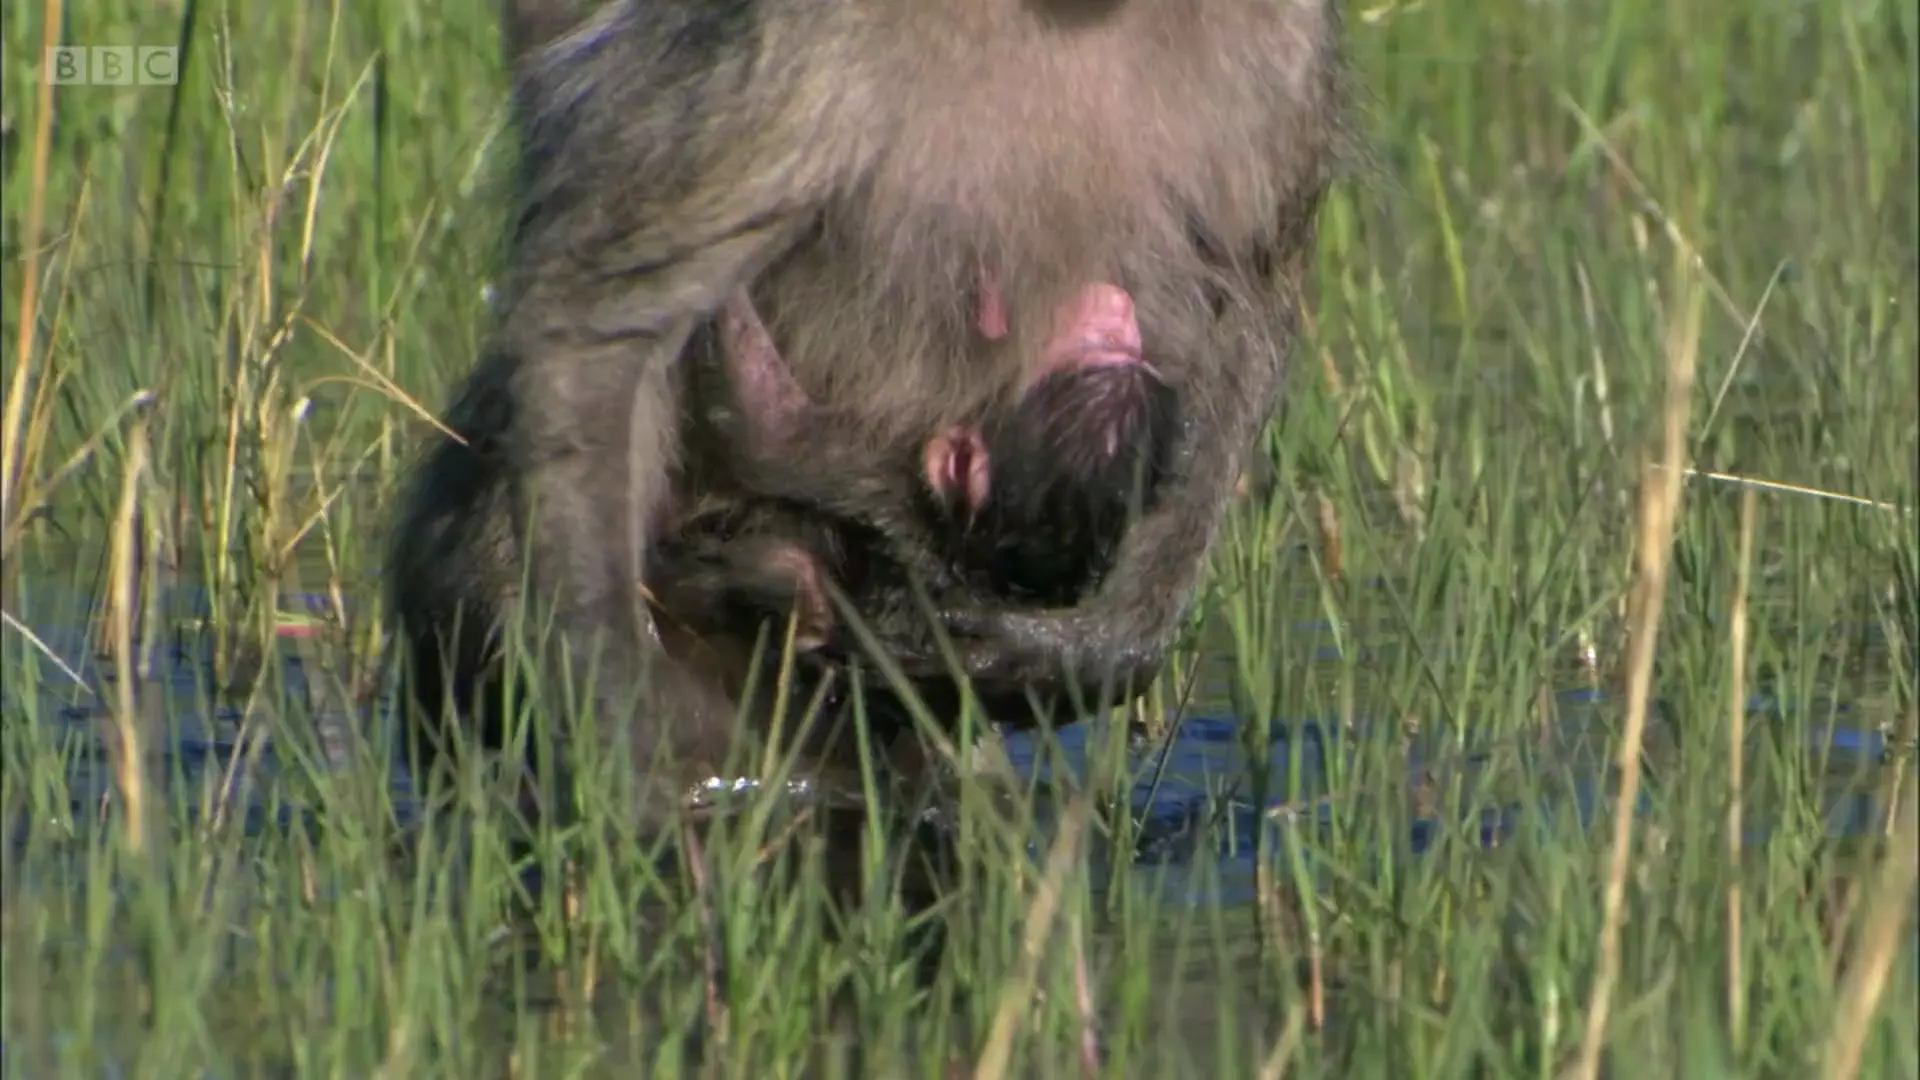 Grey-footed chacma baboon (Papio ursinus griseipes) as shown in Planet Earth - From Pole to Pole